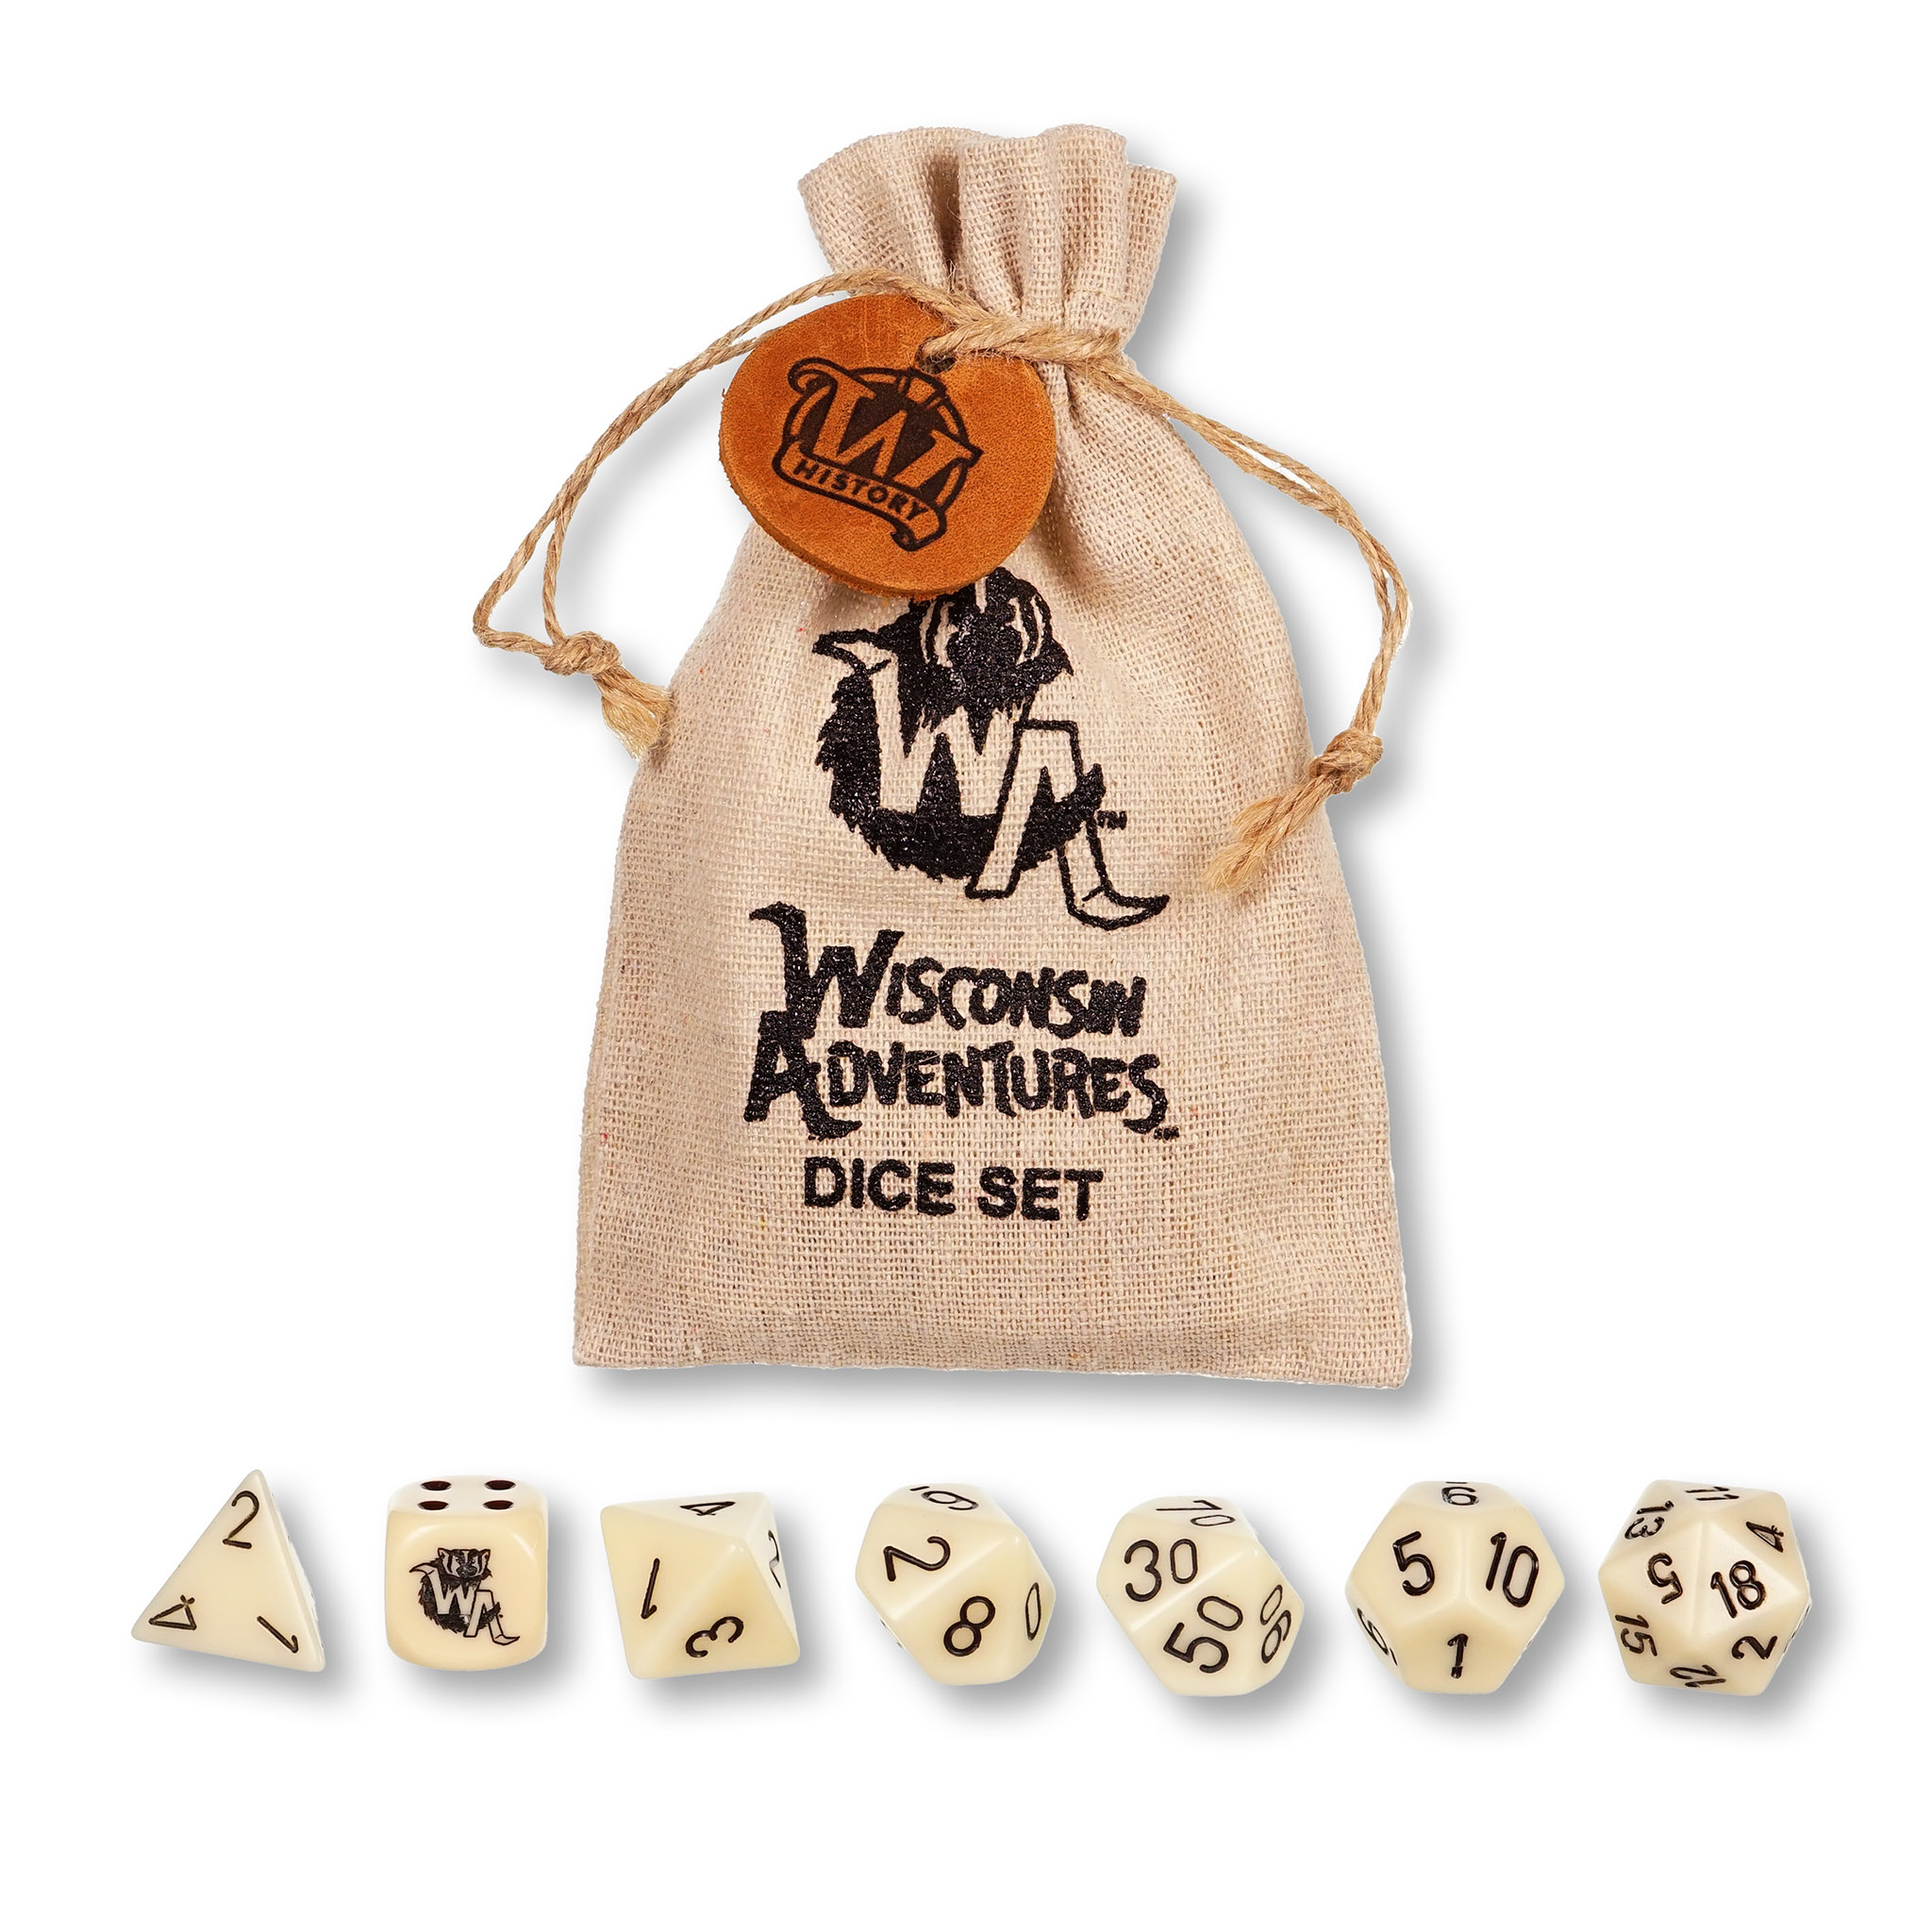 Myths & Legends Dice set with a complete set of beige dice, a canvas bag with leather tag.